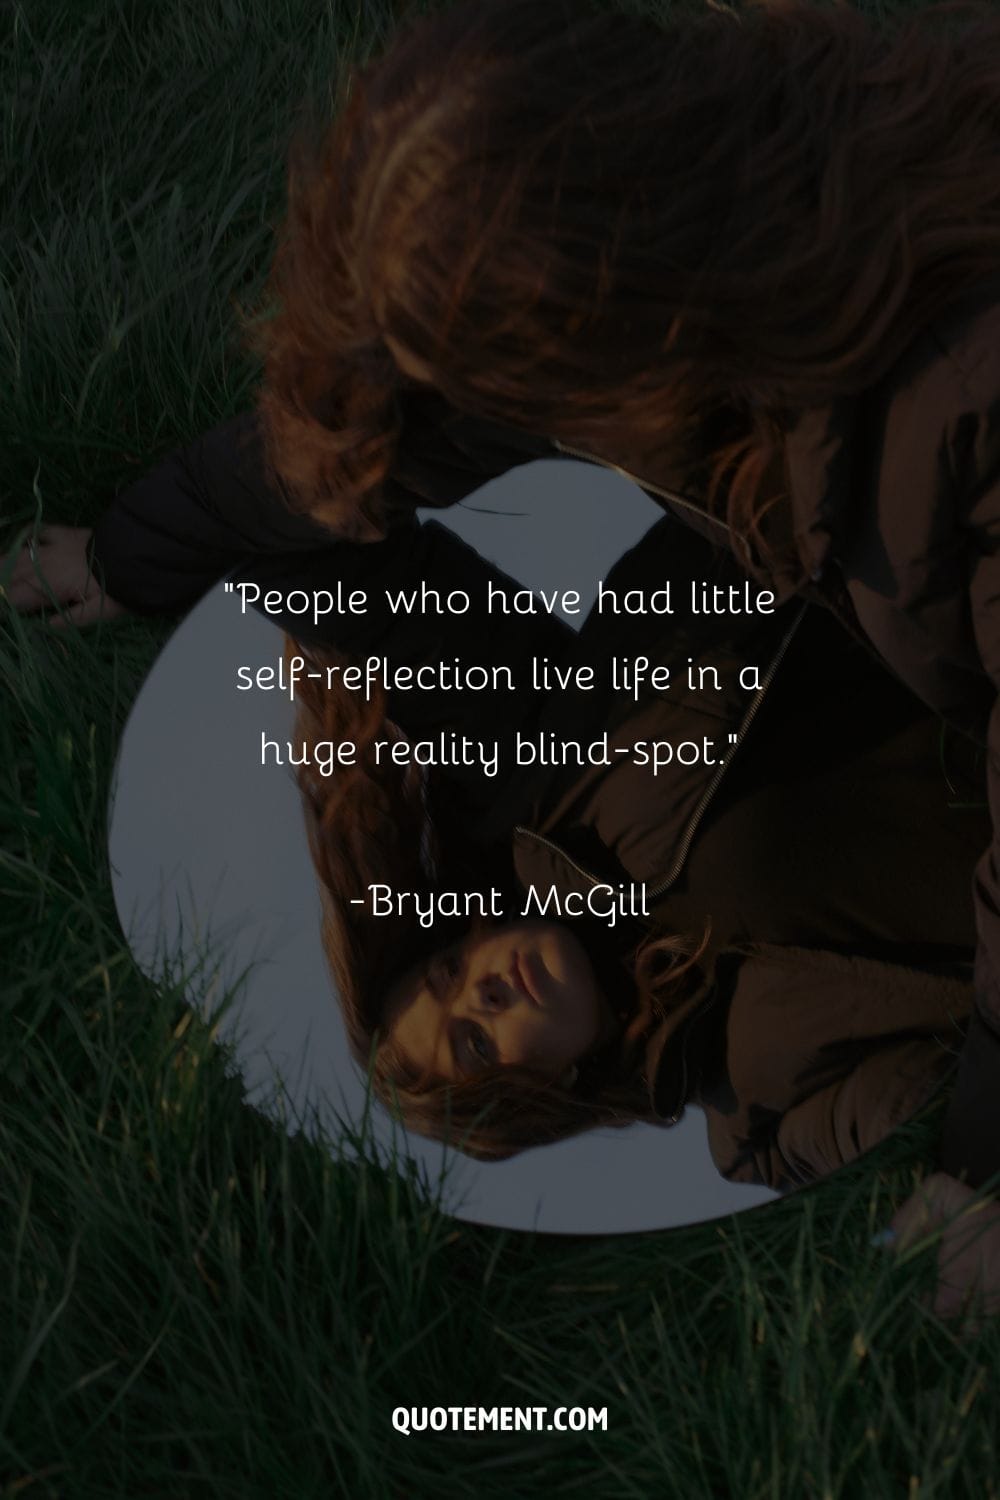 People who have had little self-reflection live life in a huge reality blind-spot. – Bryant McGill